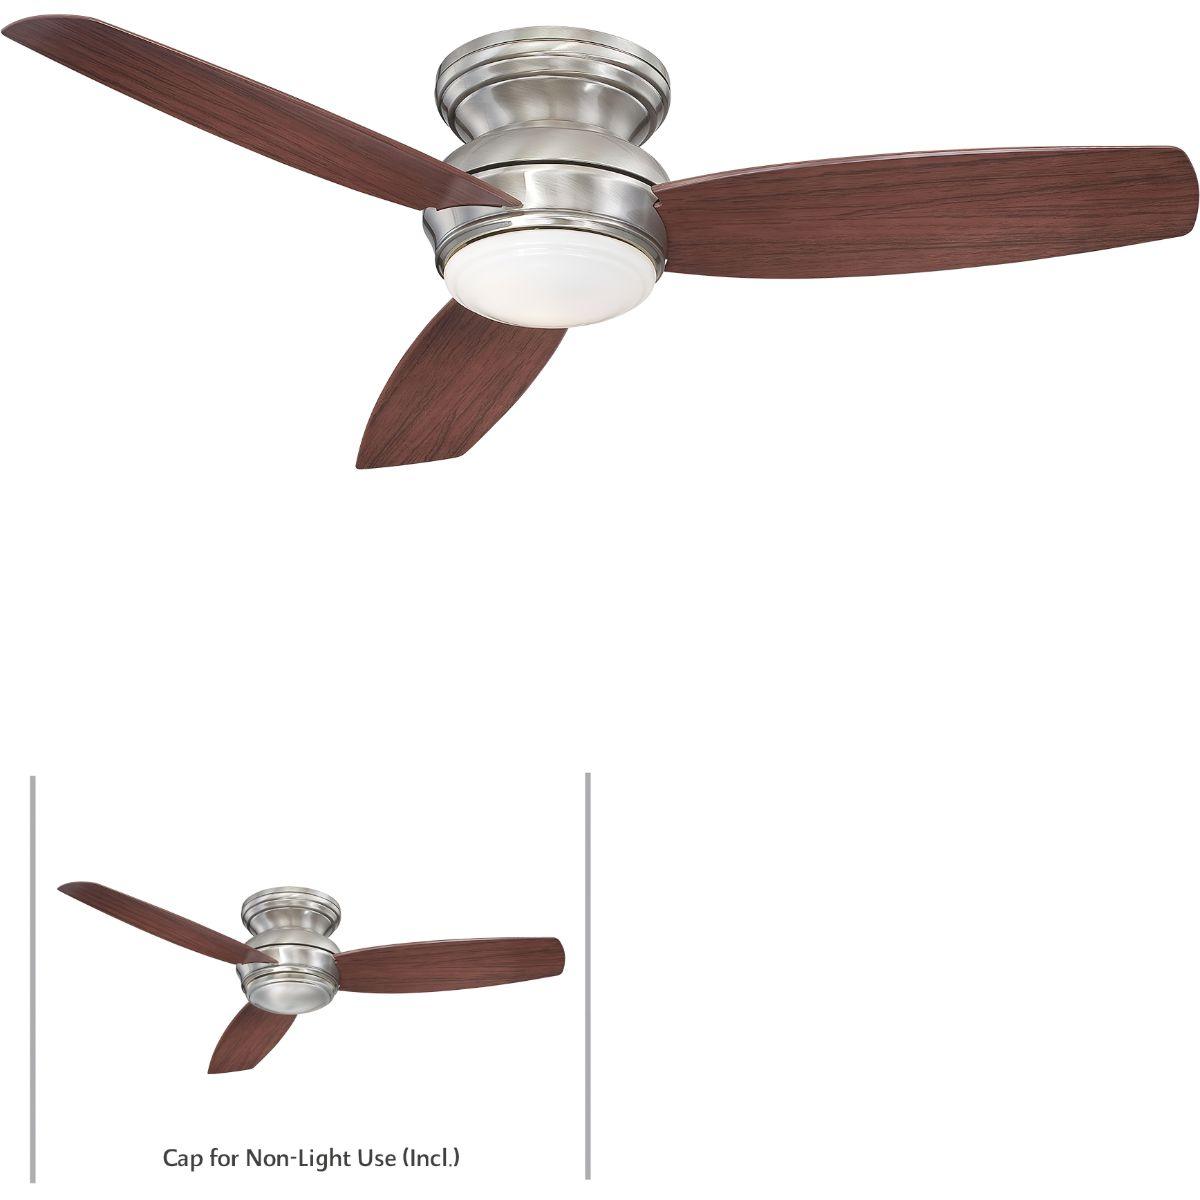 Traditional Concept 52 Inch Outdoor Ceiling Fan With Light, Wall Control Included